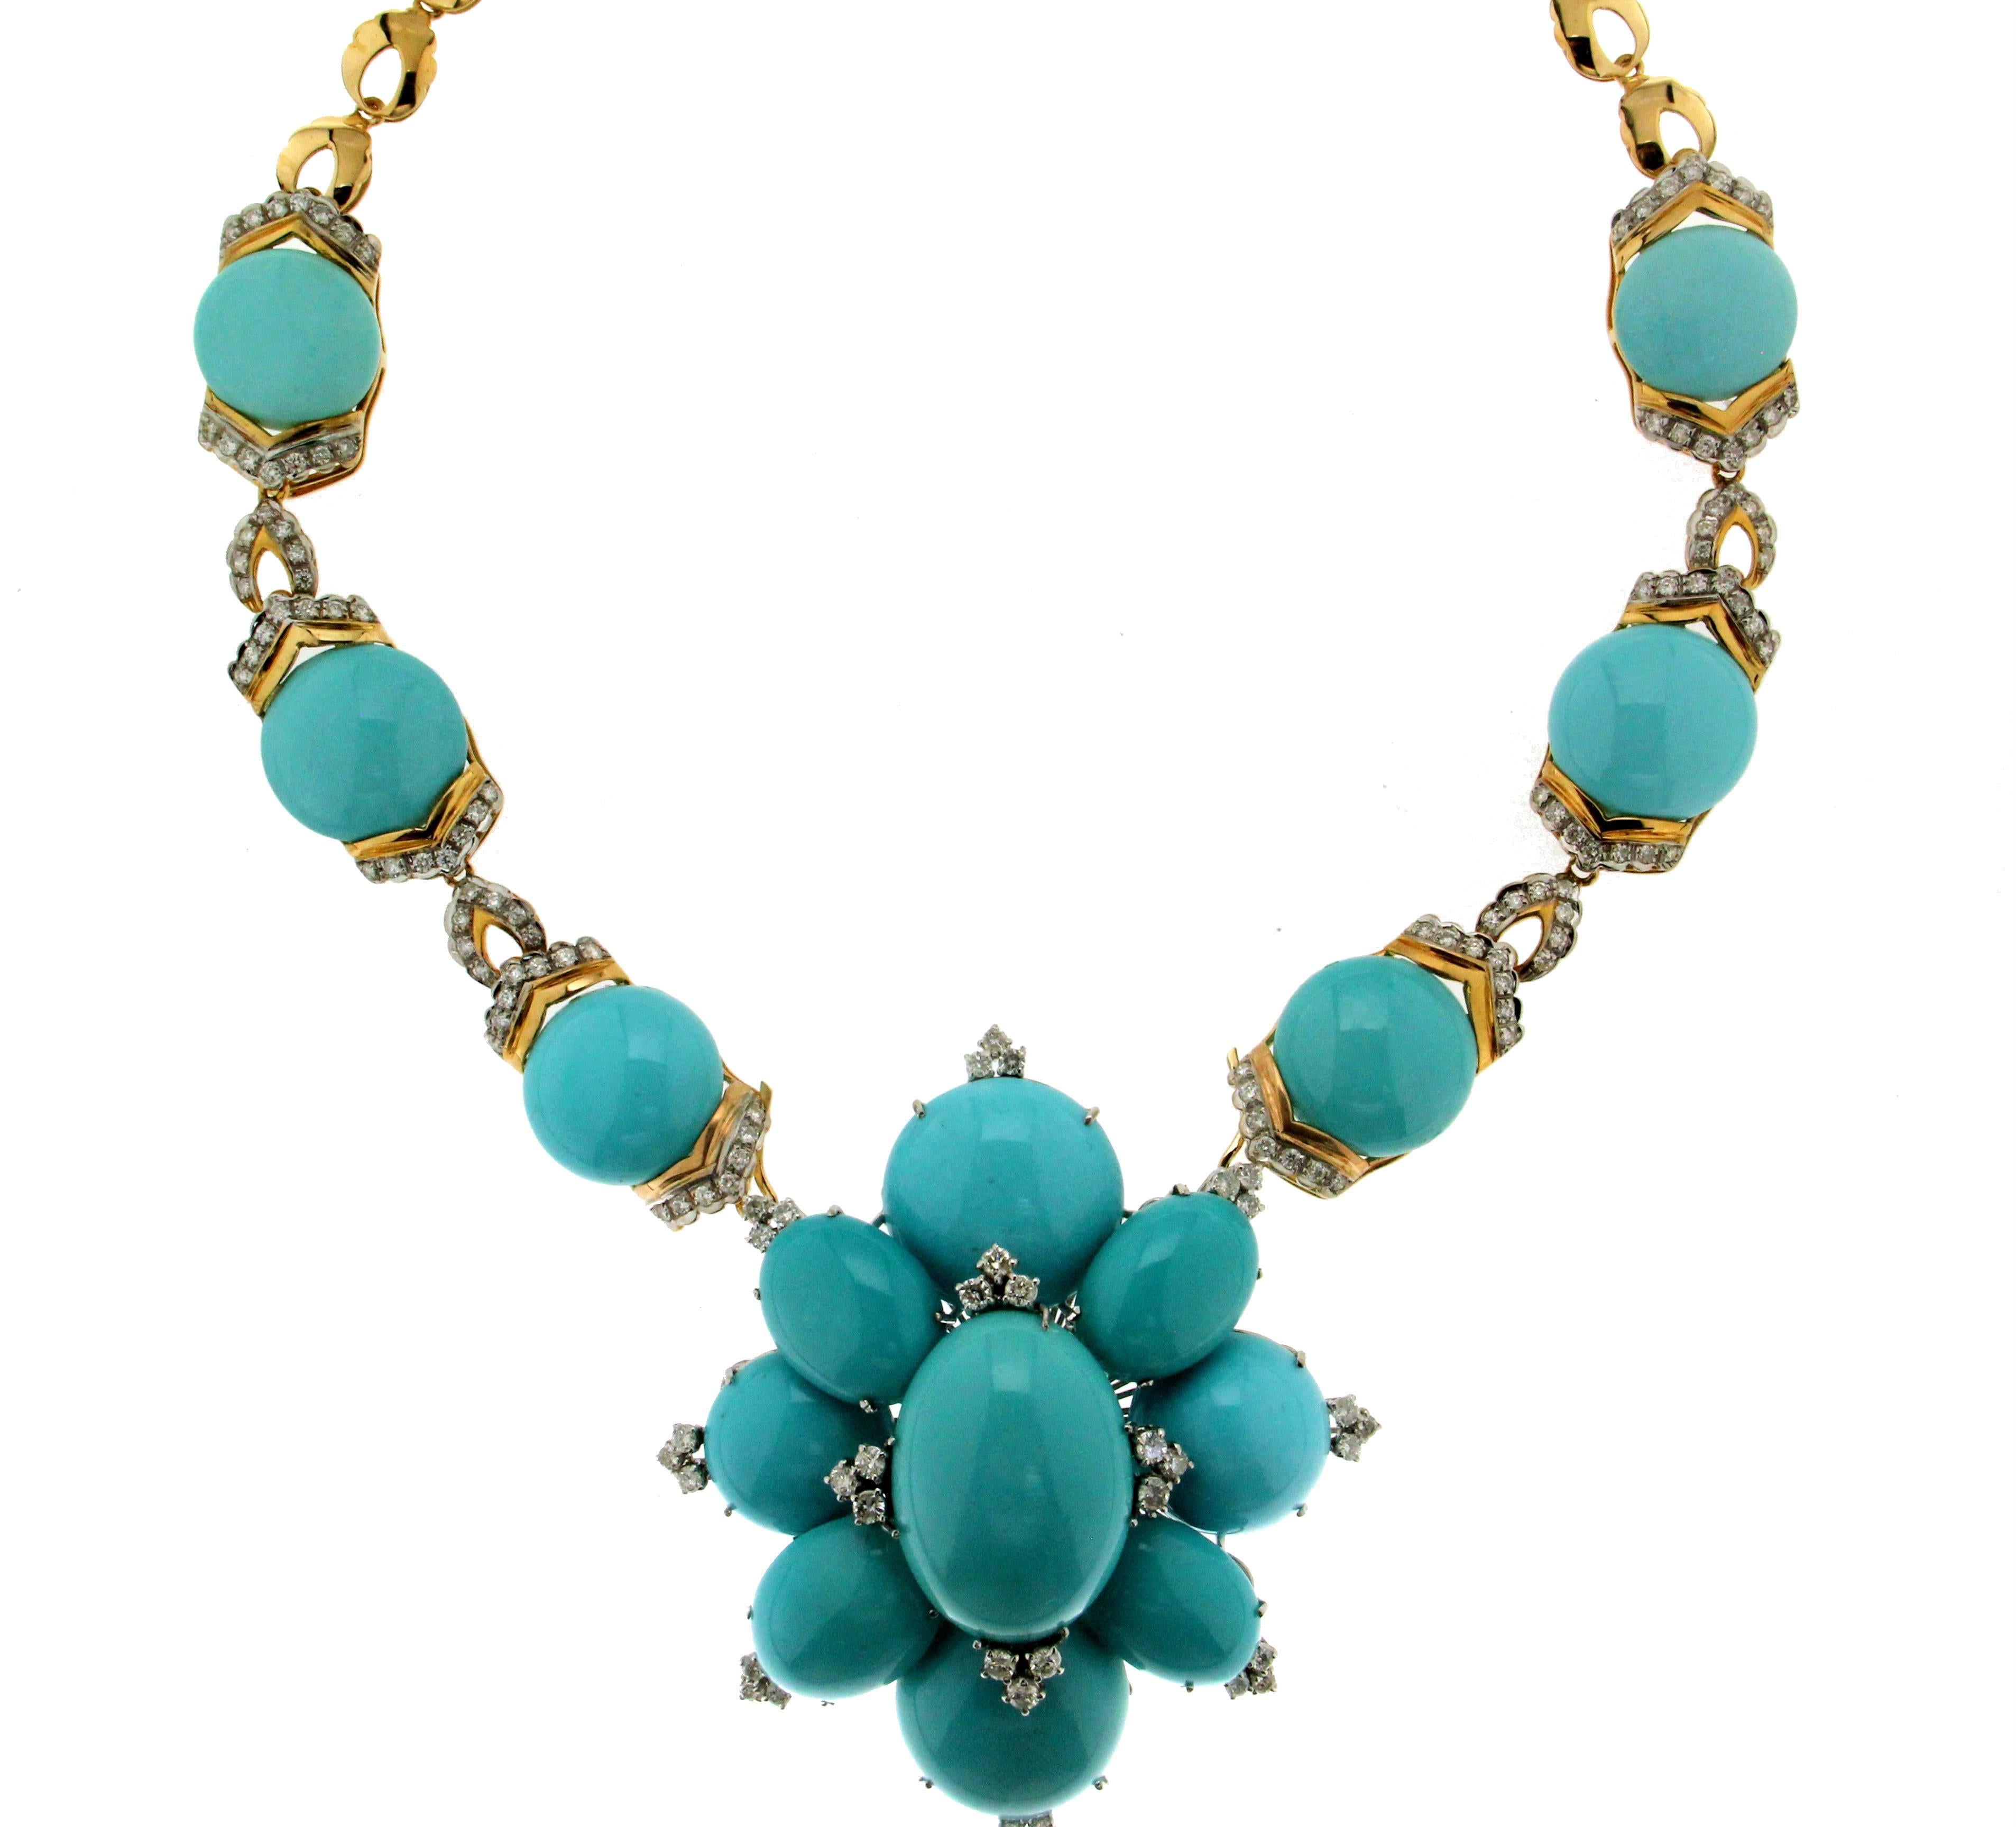 Turquoise yellow gold 18 carat diamonds pendant necklace.
The pendant can be take off and can use like brooch.

Necklace gold weight 59.20 grams
Necklace total weight 97 grams
Diamonds weight 4.25 carat
Turquoise weight 43.80 grams
Size Necklace 41